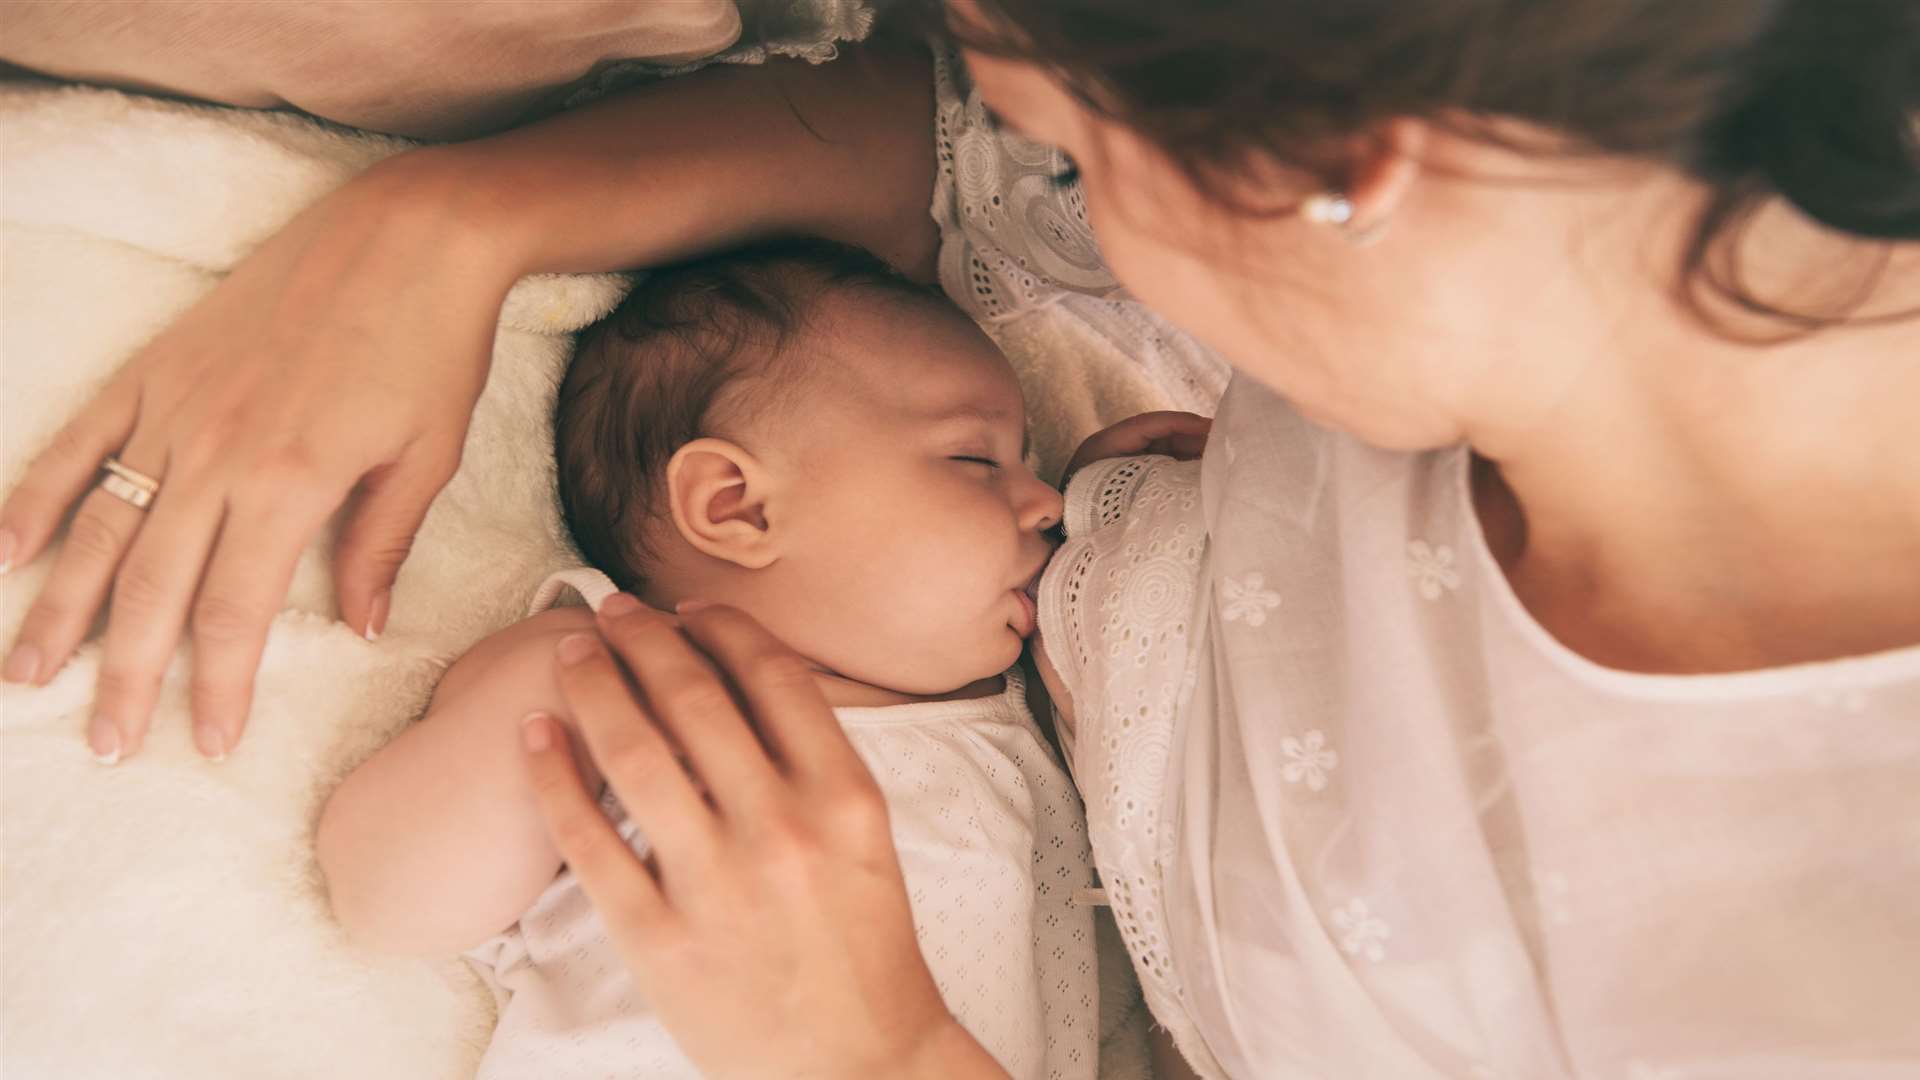 'Breastfeeding, while natural, is something all mums and their babies learn by doing'